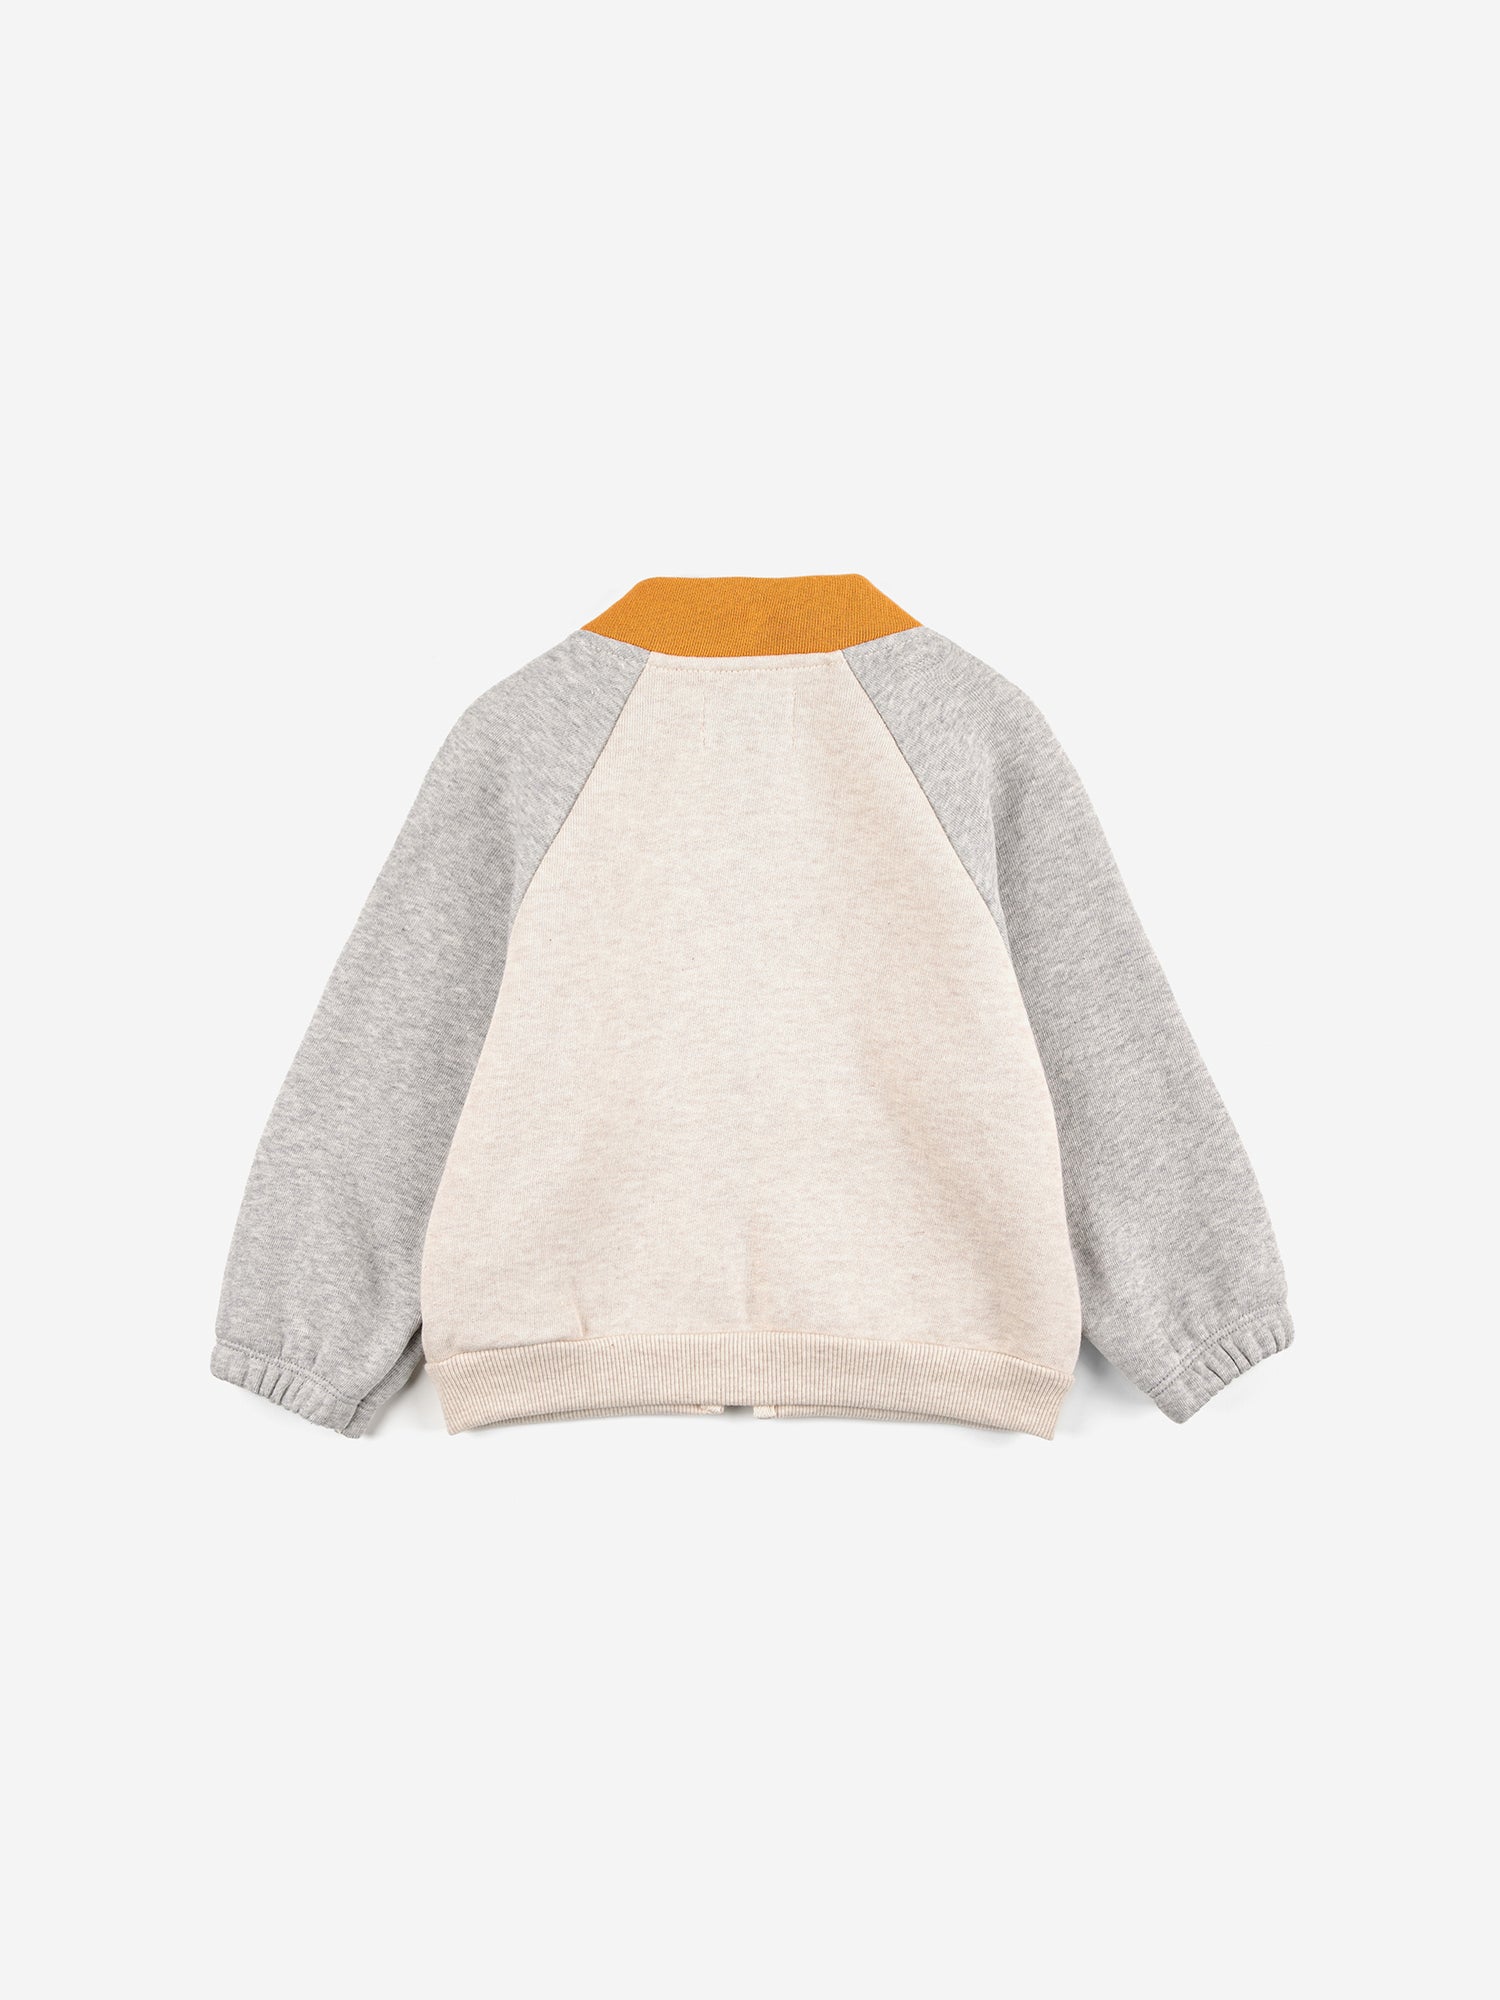 Color Block Sweatshirt by Bobo Choses. 66% cotton 34% organic cotton colorblock zipper sweat shirt. Features an orange collar & green front pockets. Elasticized wristbands & fleece lining makes this super cozy for your little one.  \Made ethically and sustainably in Portugal for Bobo Choses.